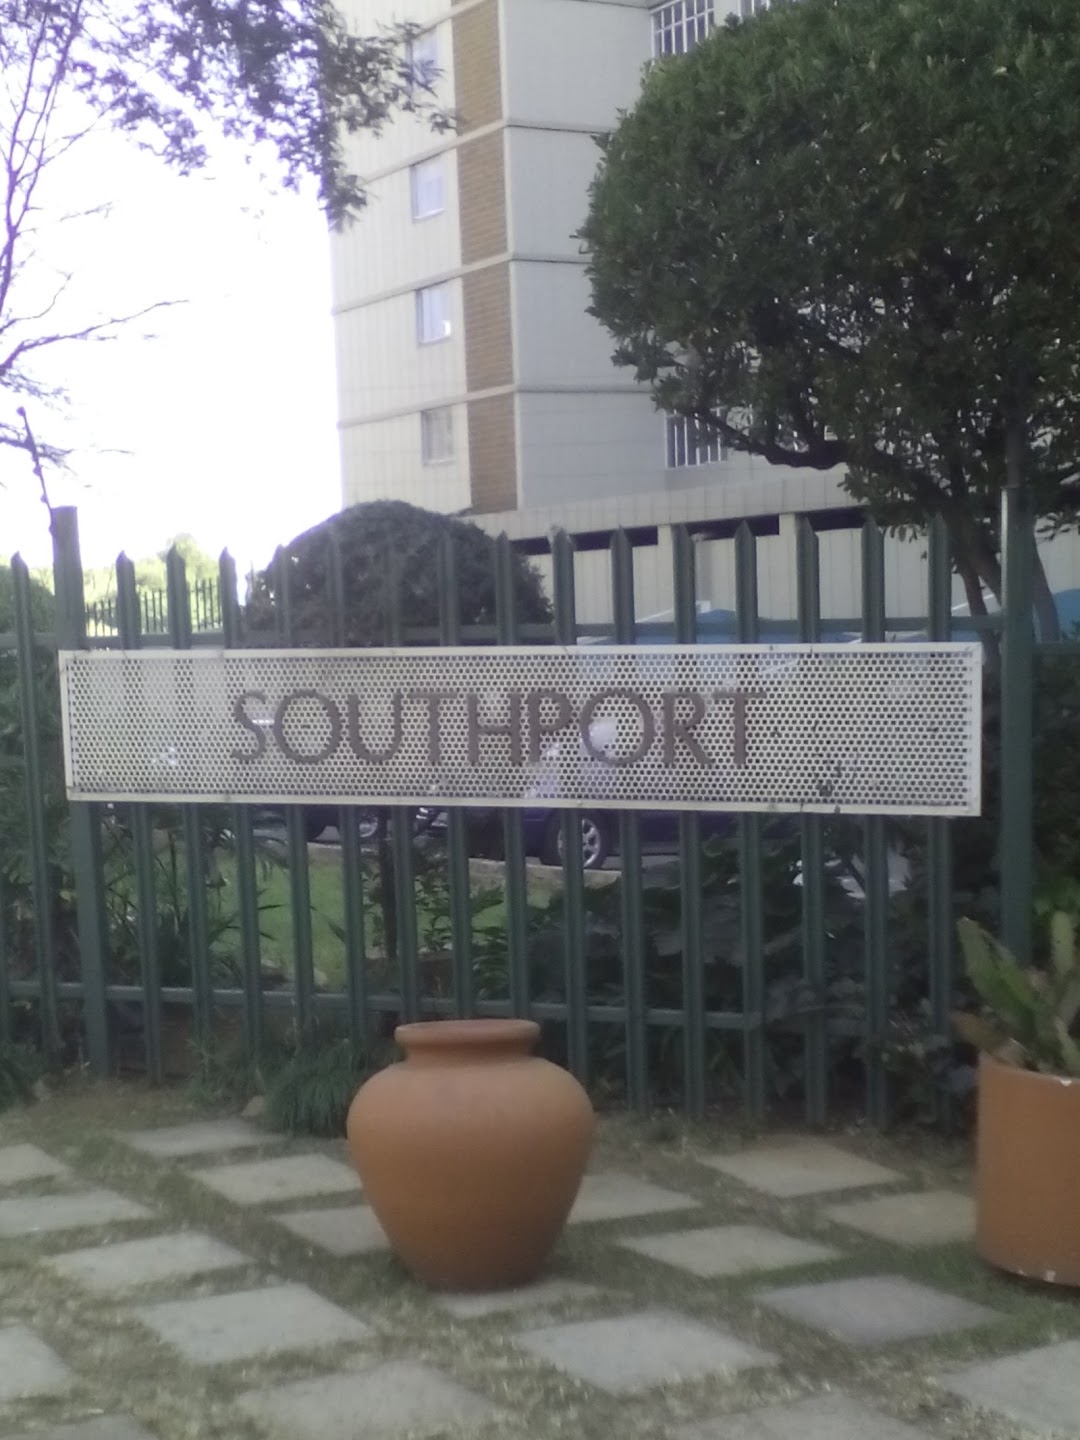 Southport.